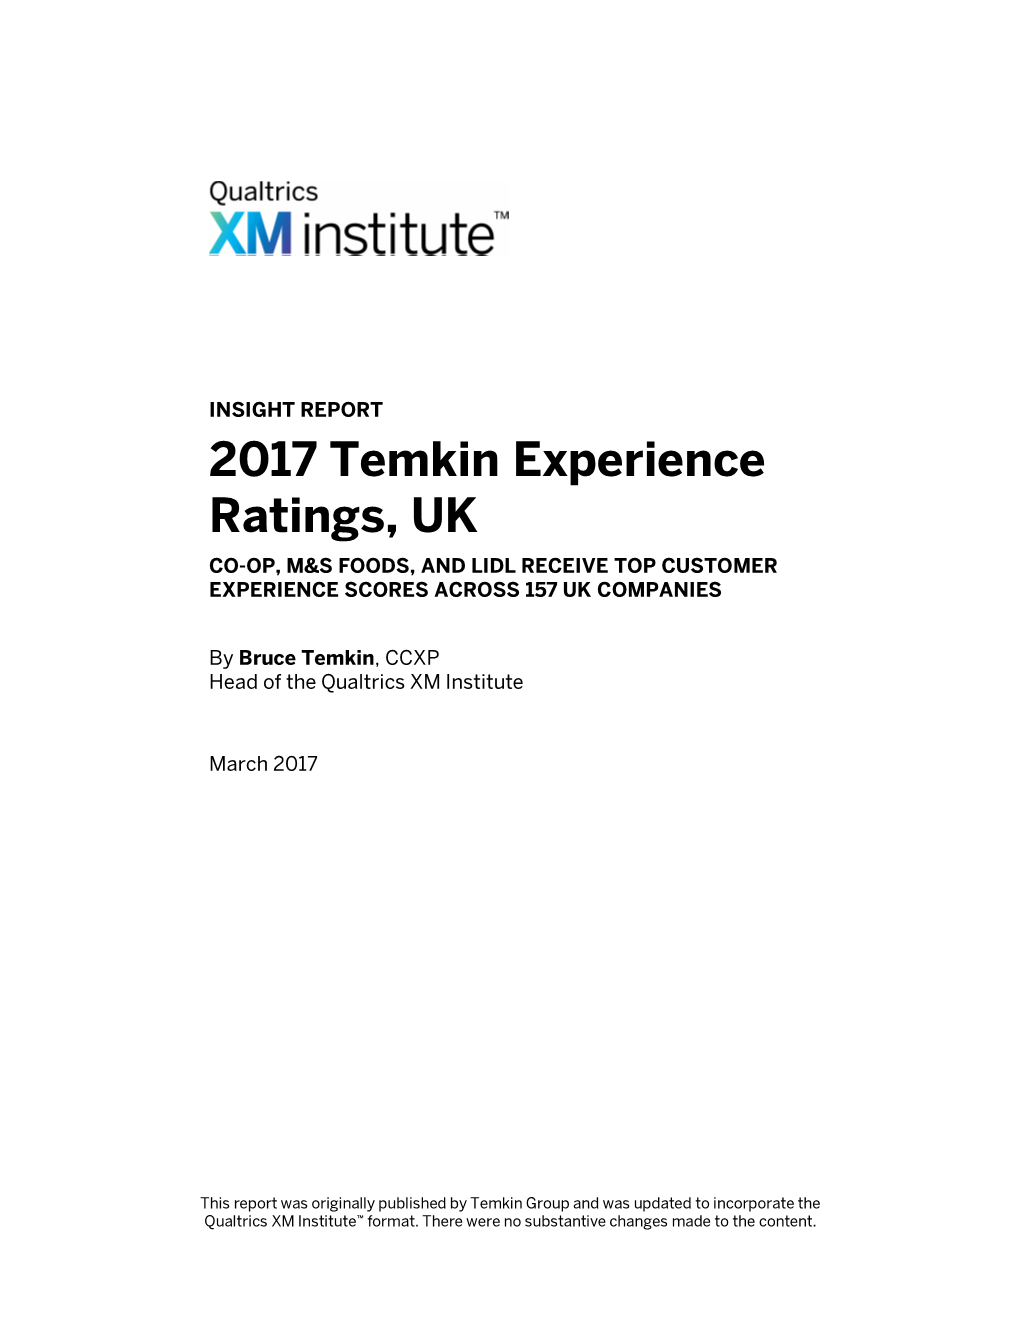 2017 Temkin Experience Ratings, UK CO-OP, M&S FOODS, and LIDL RECEIVE TOP CUSTOMER EXPERIENCE SCORES ACROSS 157 UK COMPANIES